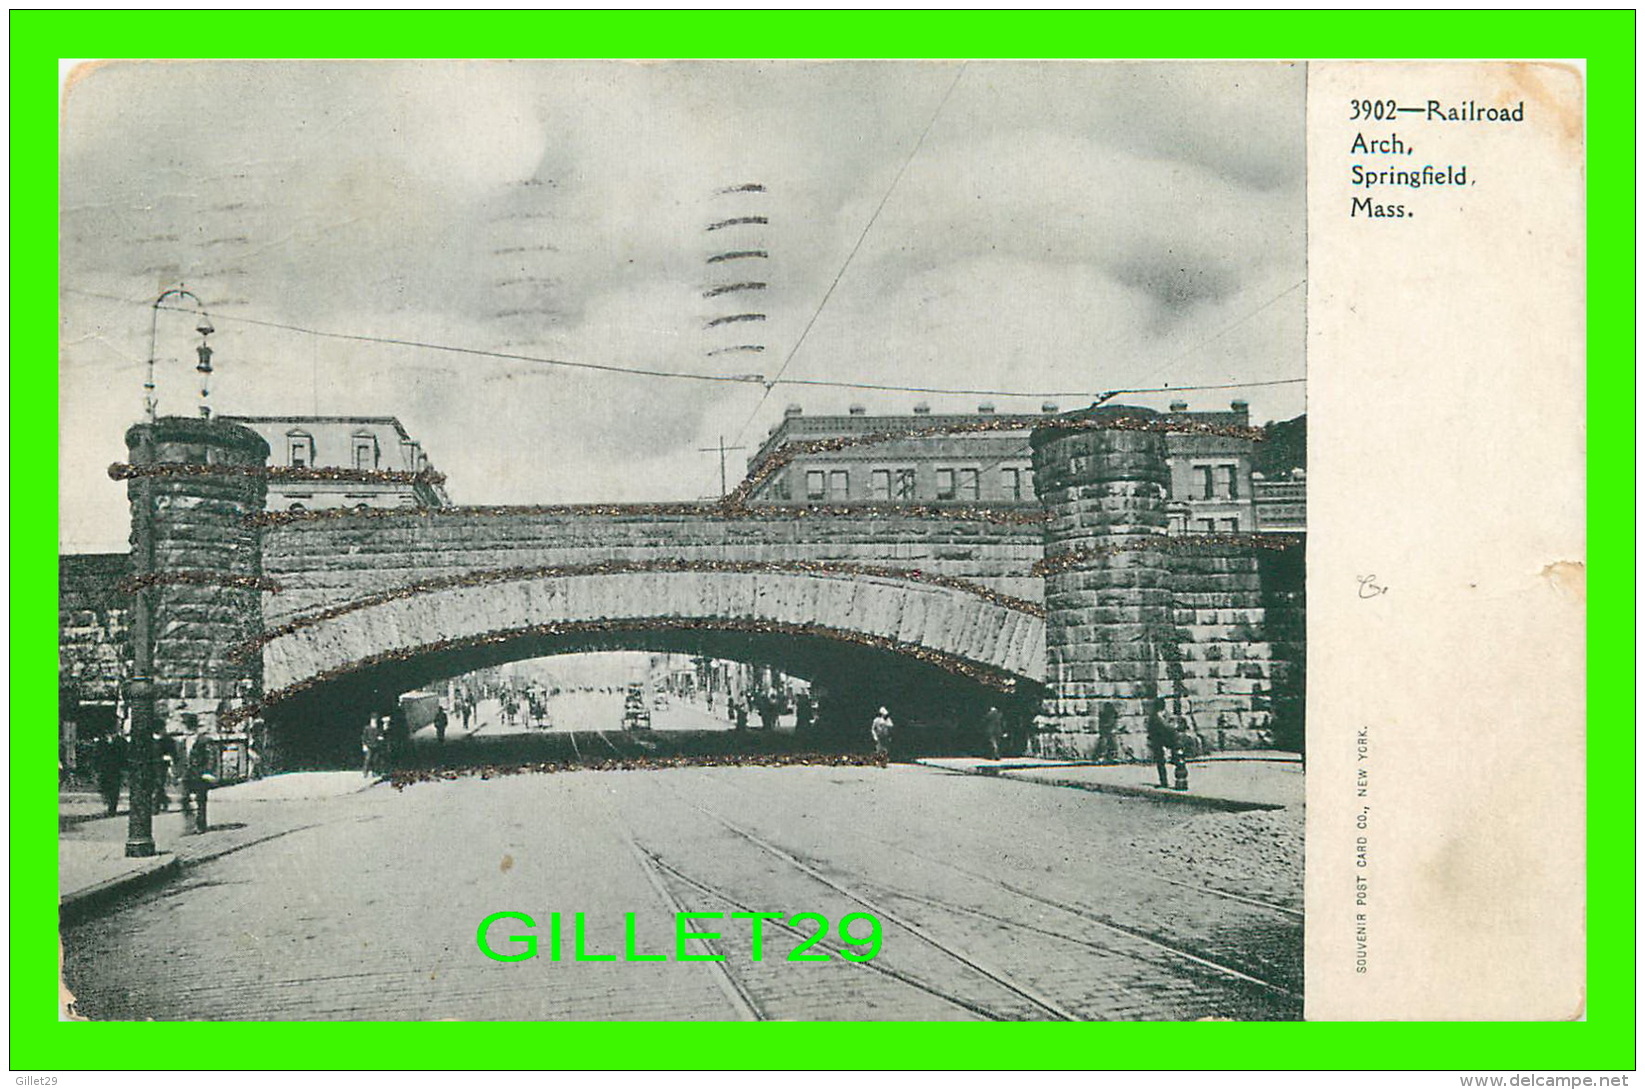 SPRINFIELD, MA -RAILROAD ARCH - SPARKLES - ANIMATED - TRAVEL IN 1909 - - Springfield